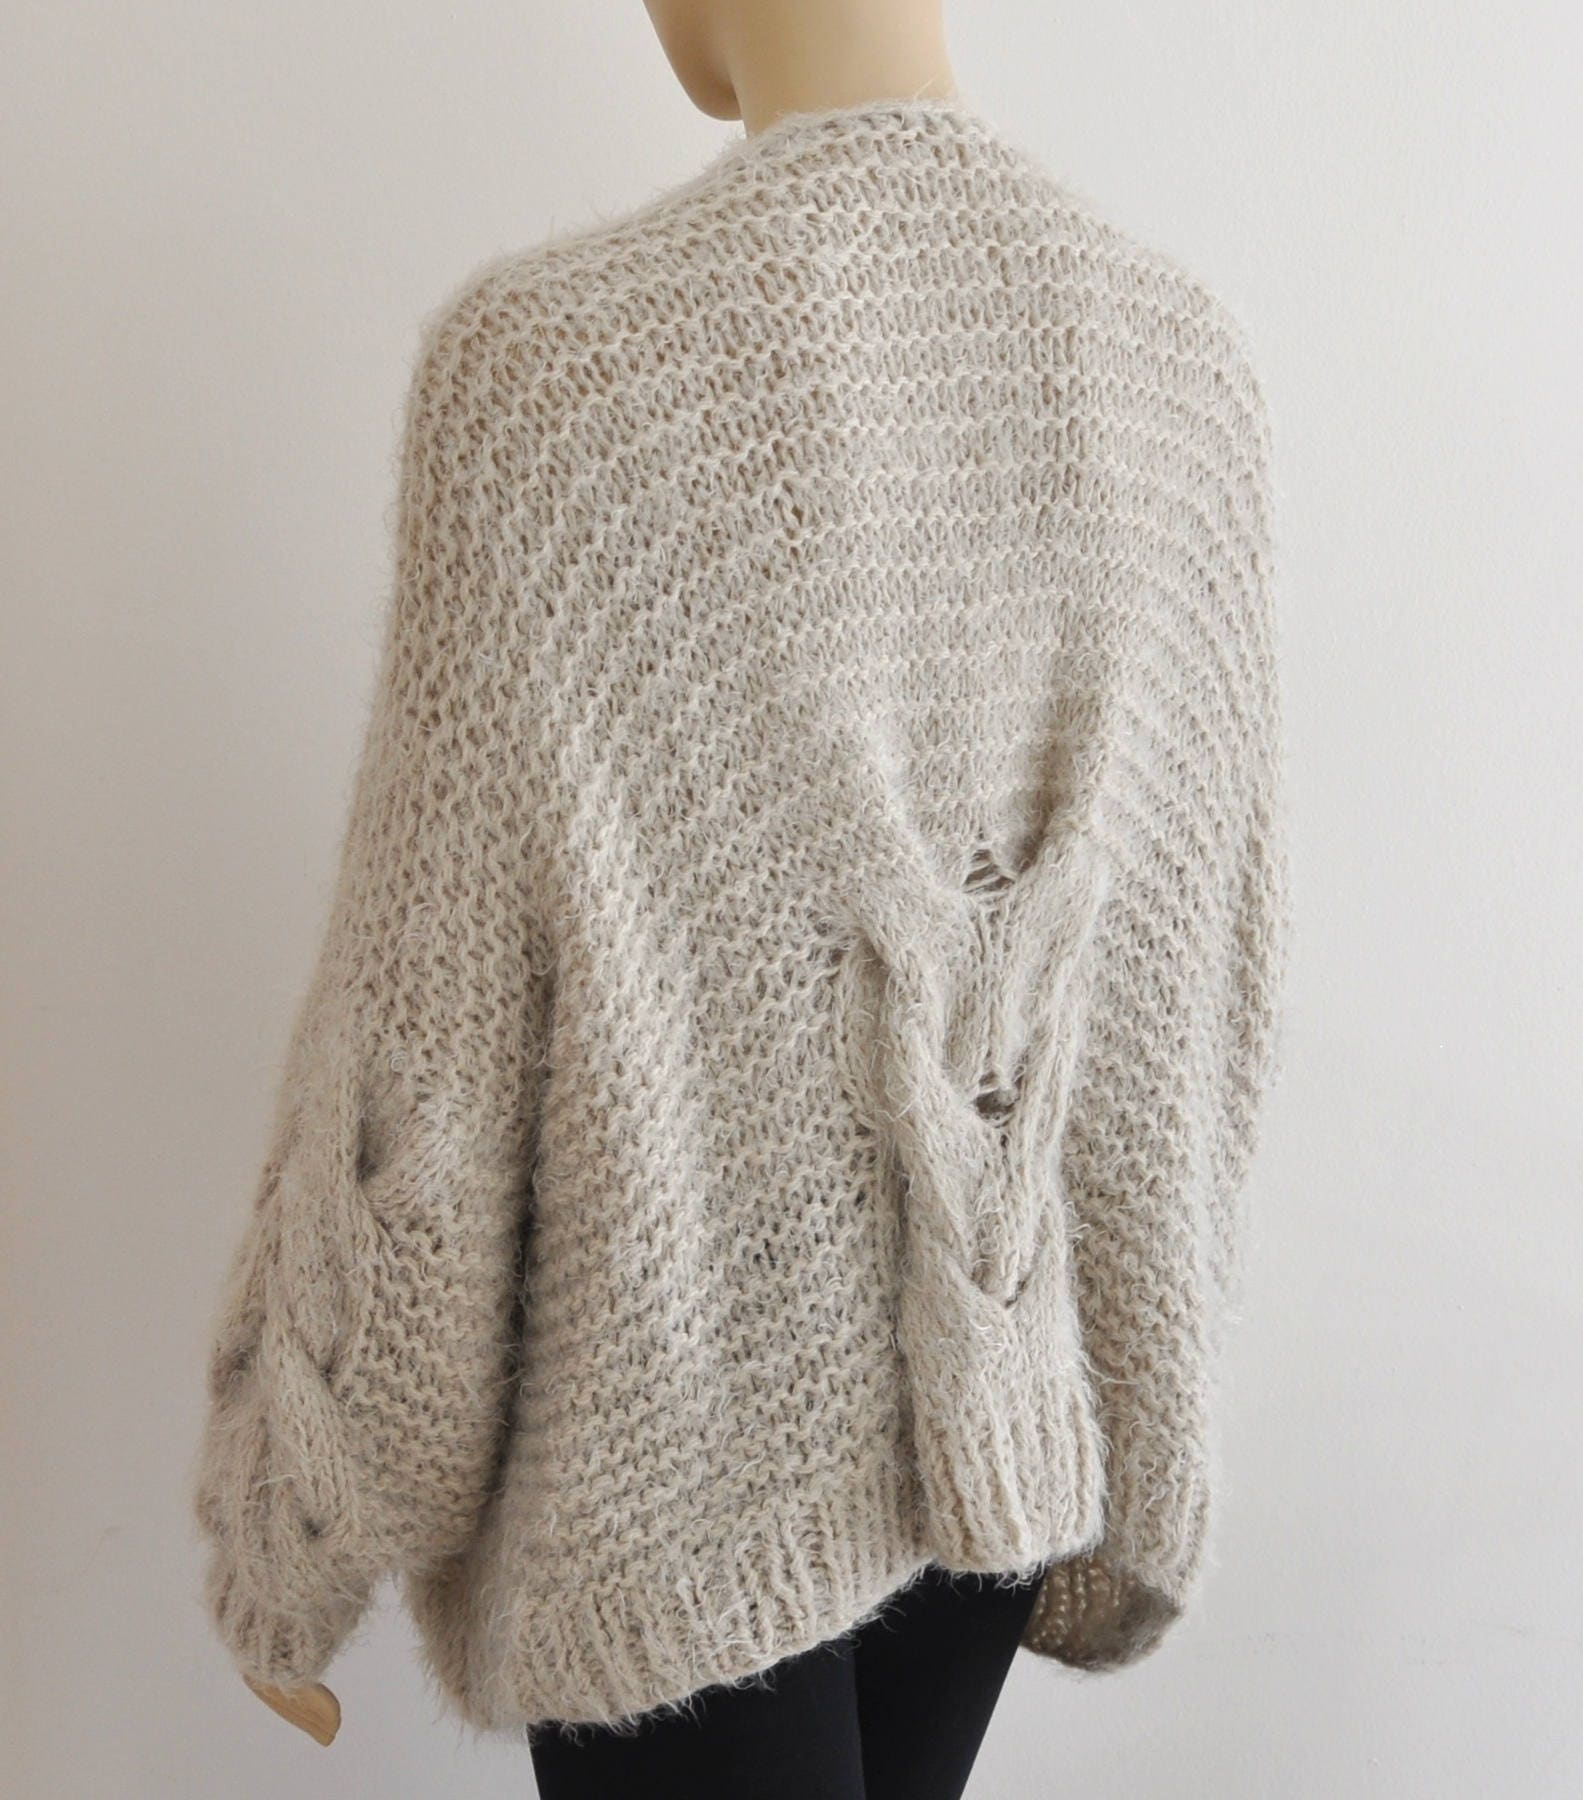 Beige Oversized Cardigan Chunky Cable Knit Jacket Hand Knitted | Etsy